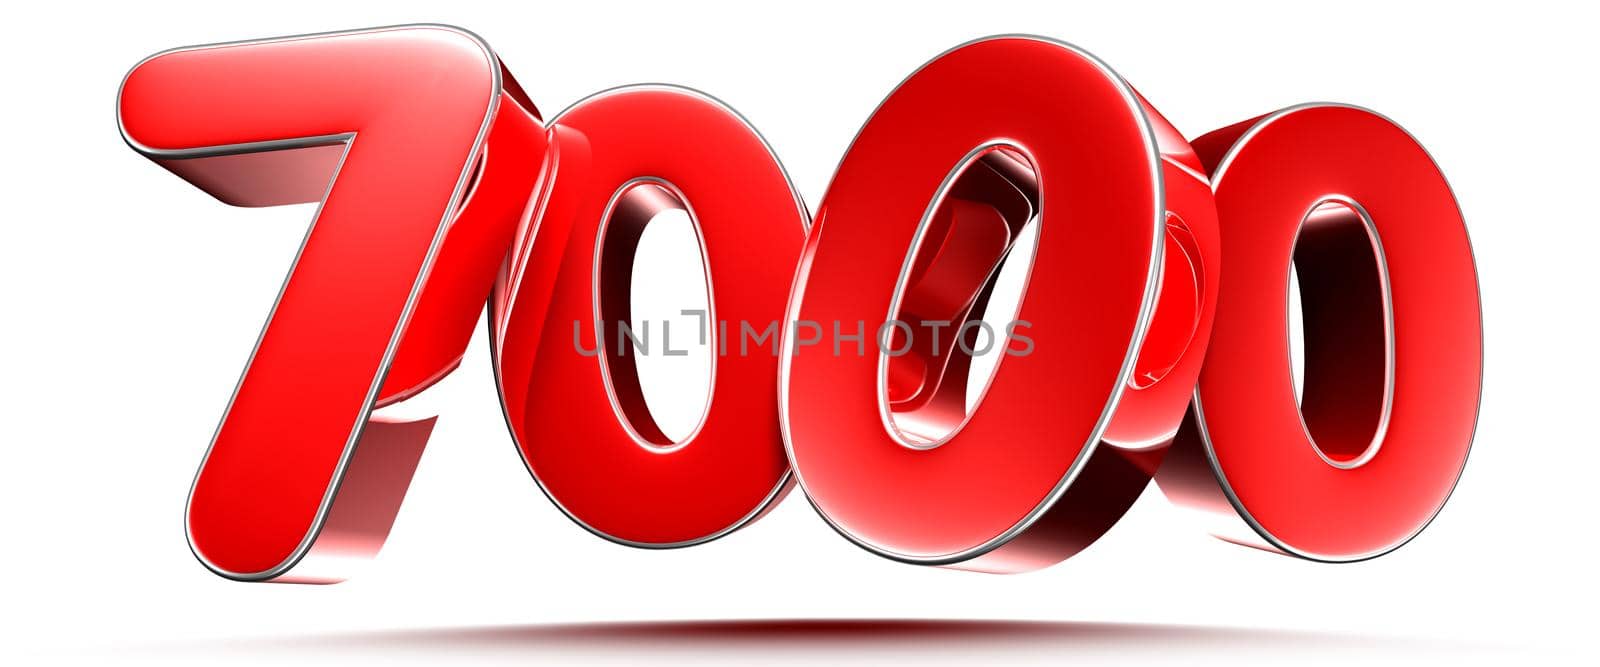 Rounded red numbers 7000 on white background 3D illustration with clipping path